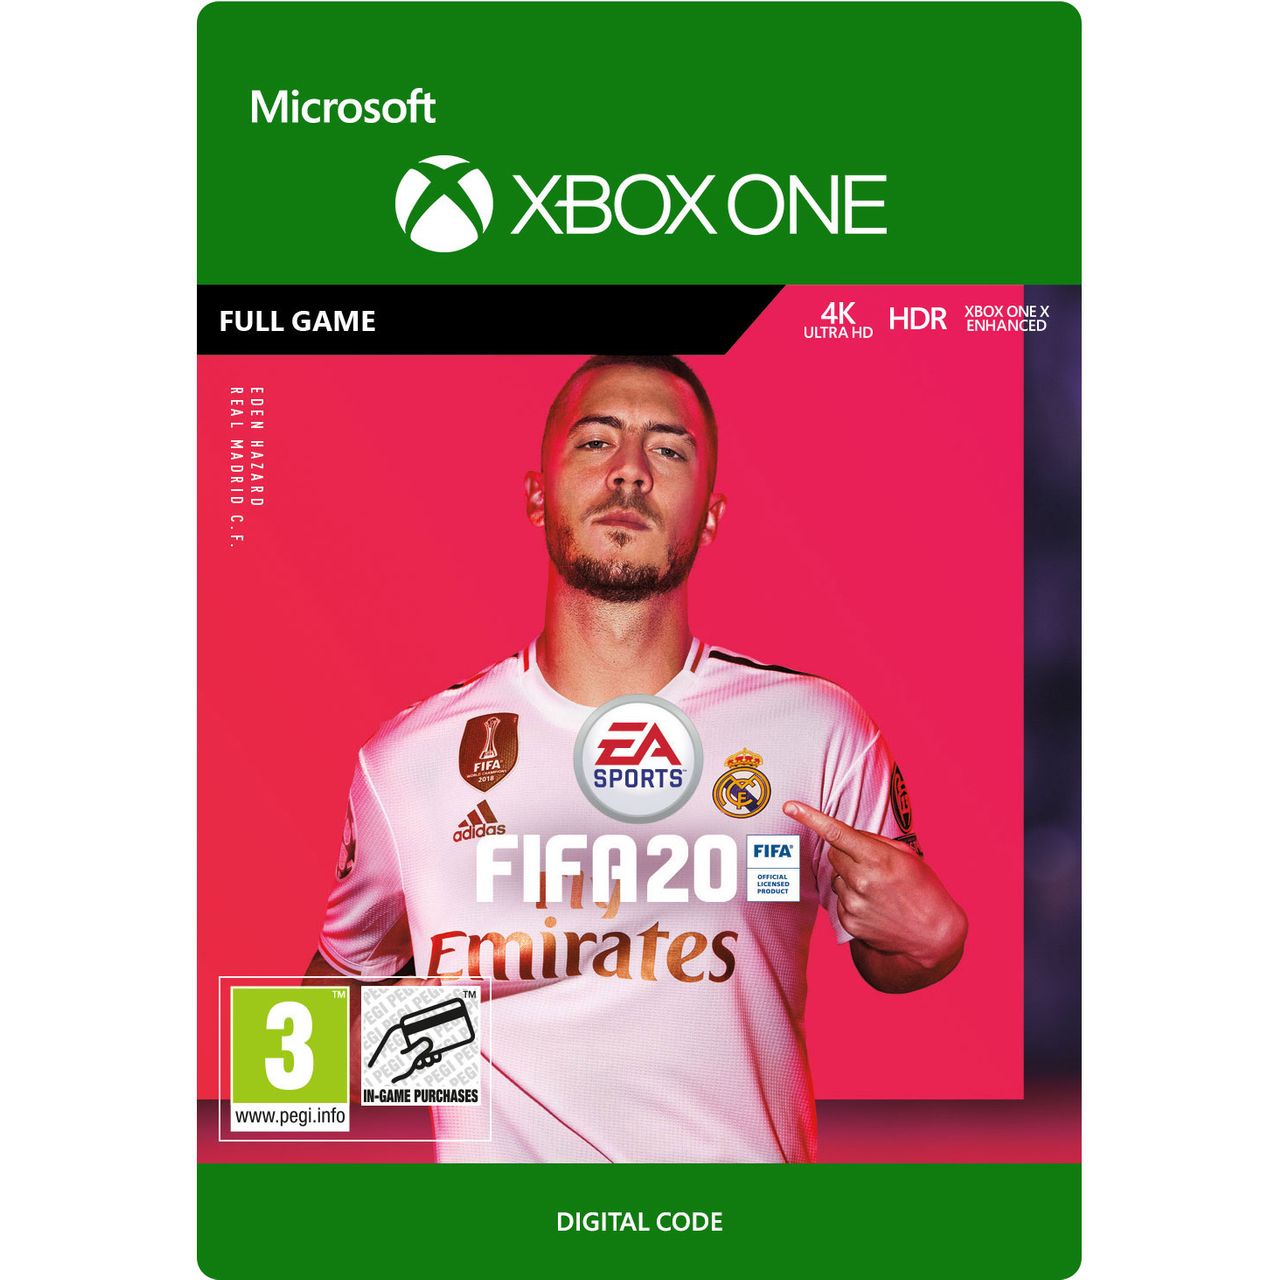 FIFA 20: Standard Edition for Xbox One [Enhanced for Xbox One X] Review